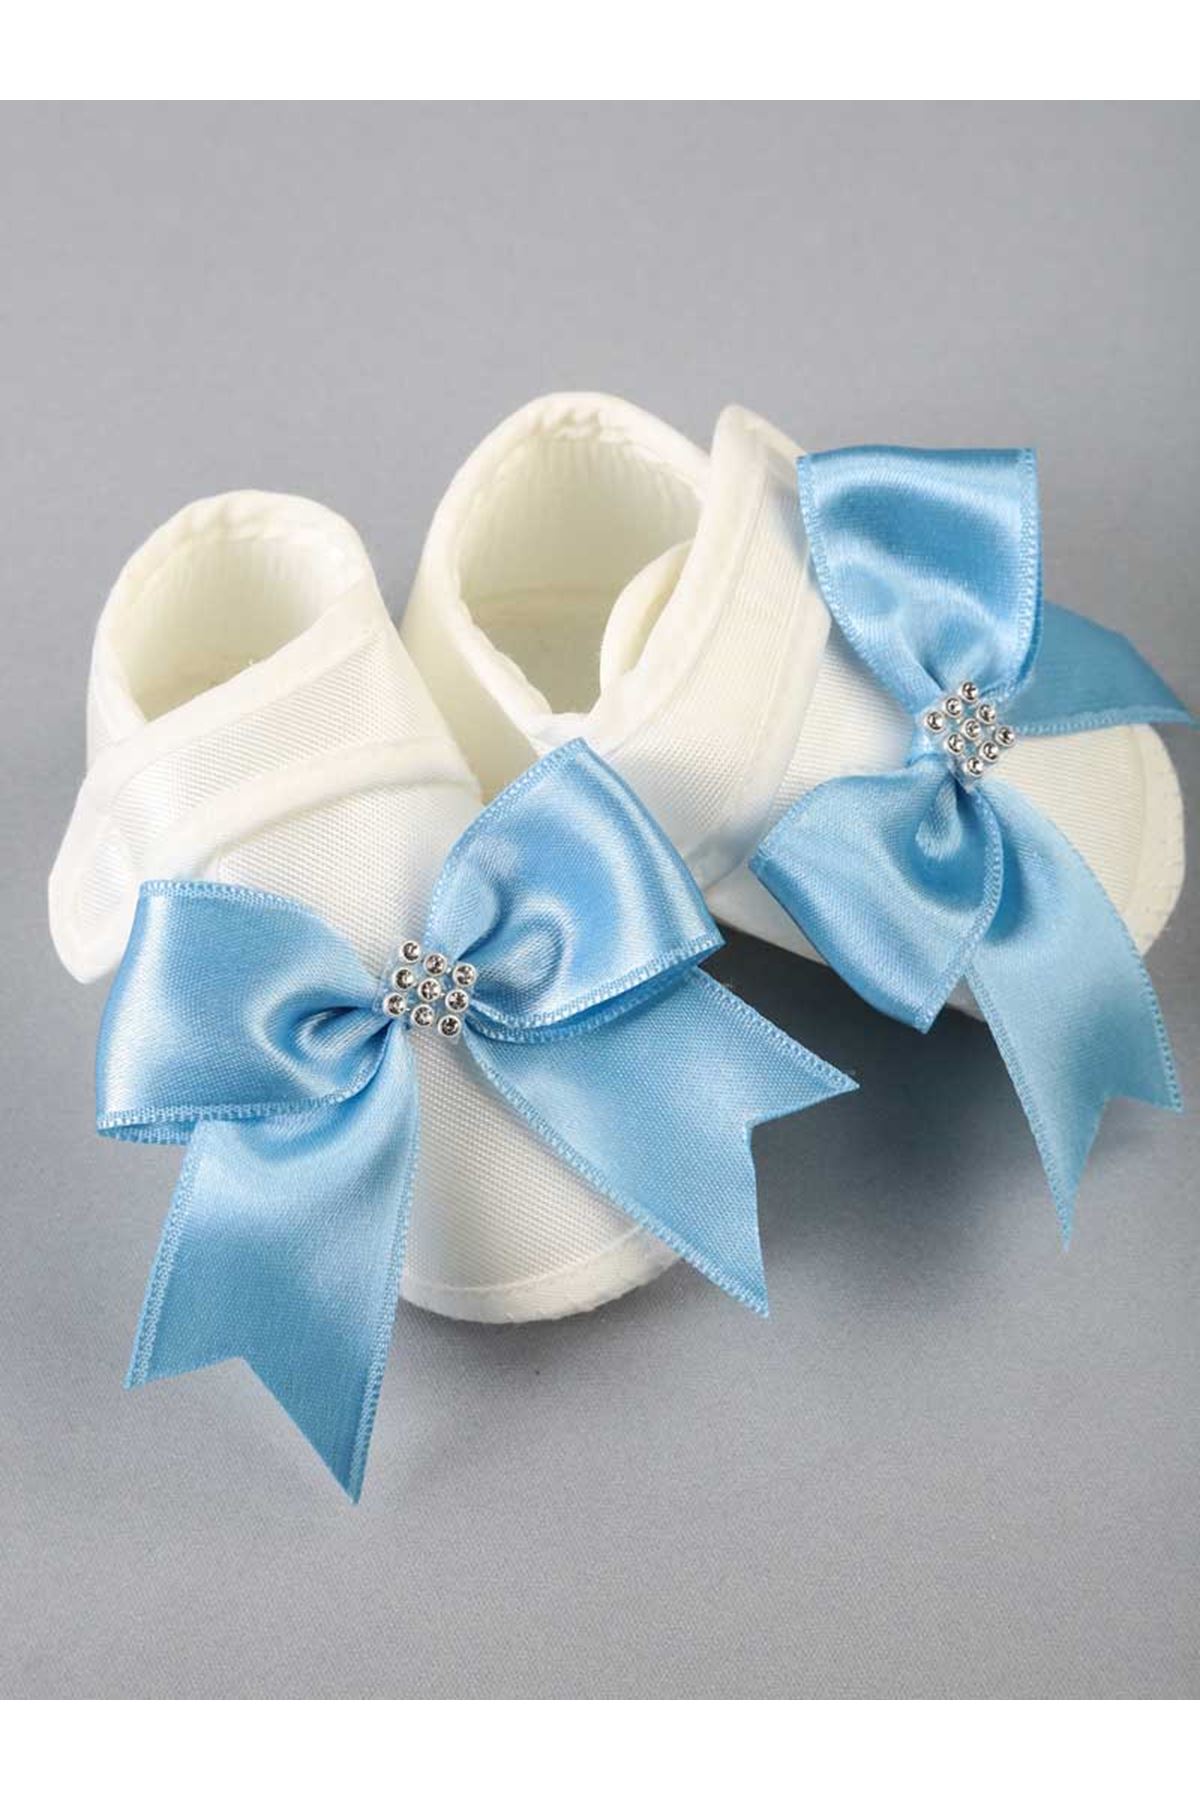 Blue Baby Rompers Boy newborn clothes King Crown 5pcs Set hat shoes gloves Prince clothing cotton babies types newborn varieties of